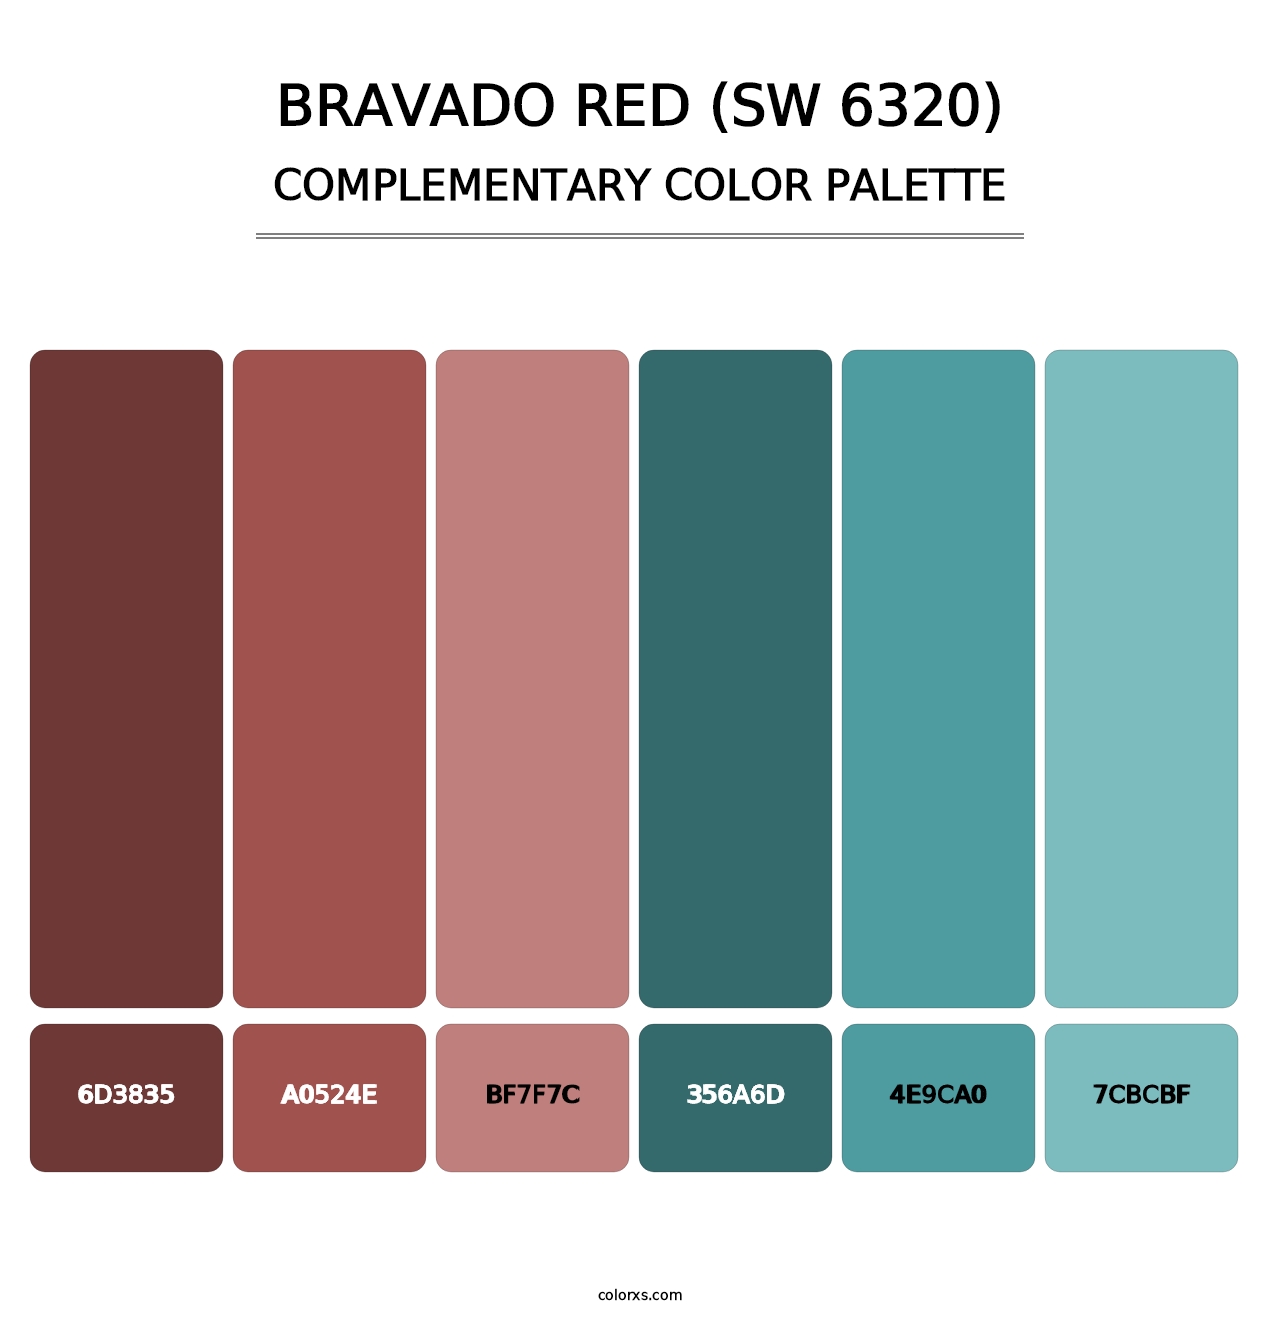 Bravado Red (SW 6320) - Complementary Color Palette